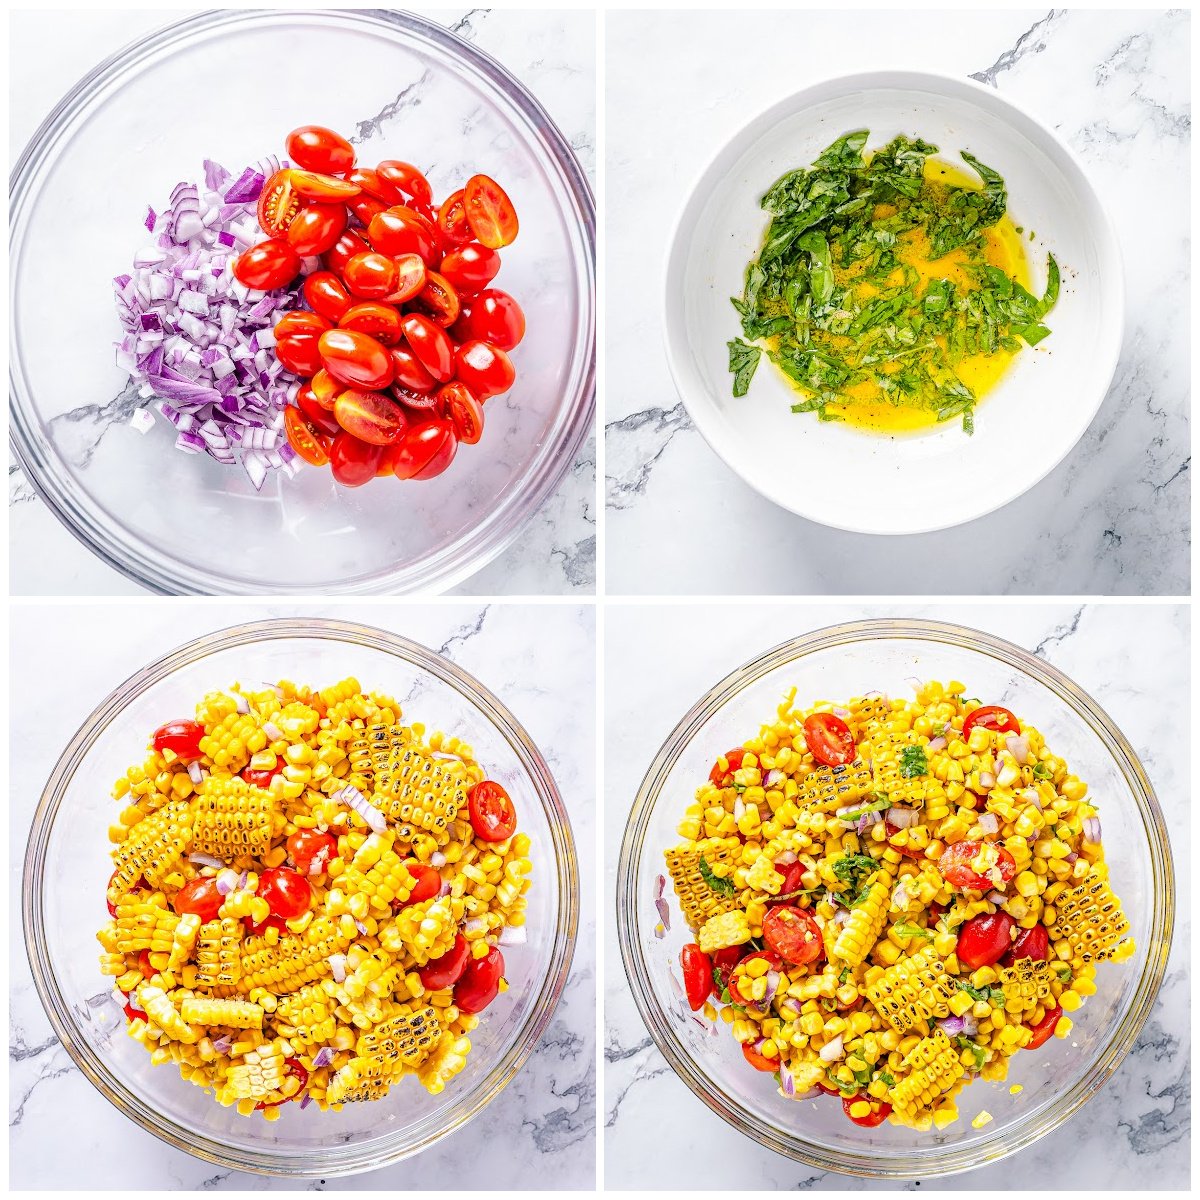 Step by step photos on how to make Corn and Tomato Salad